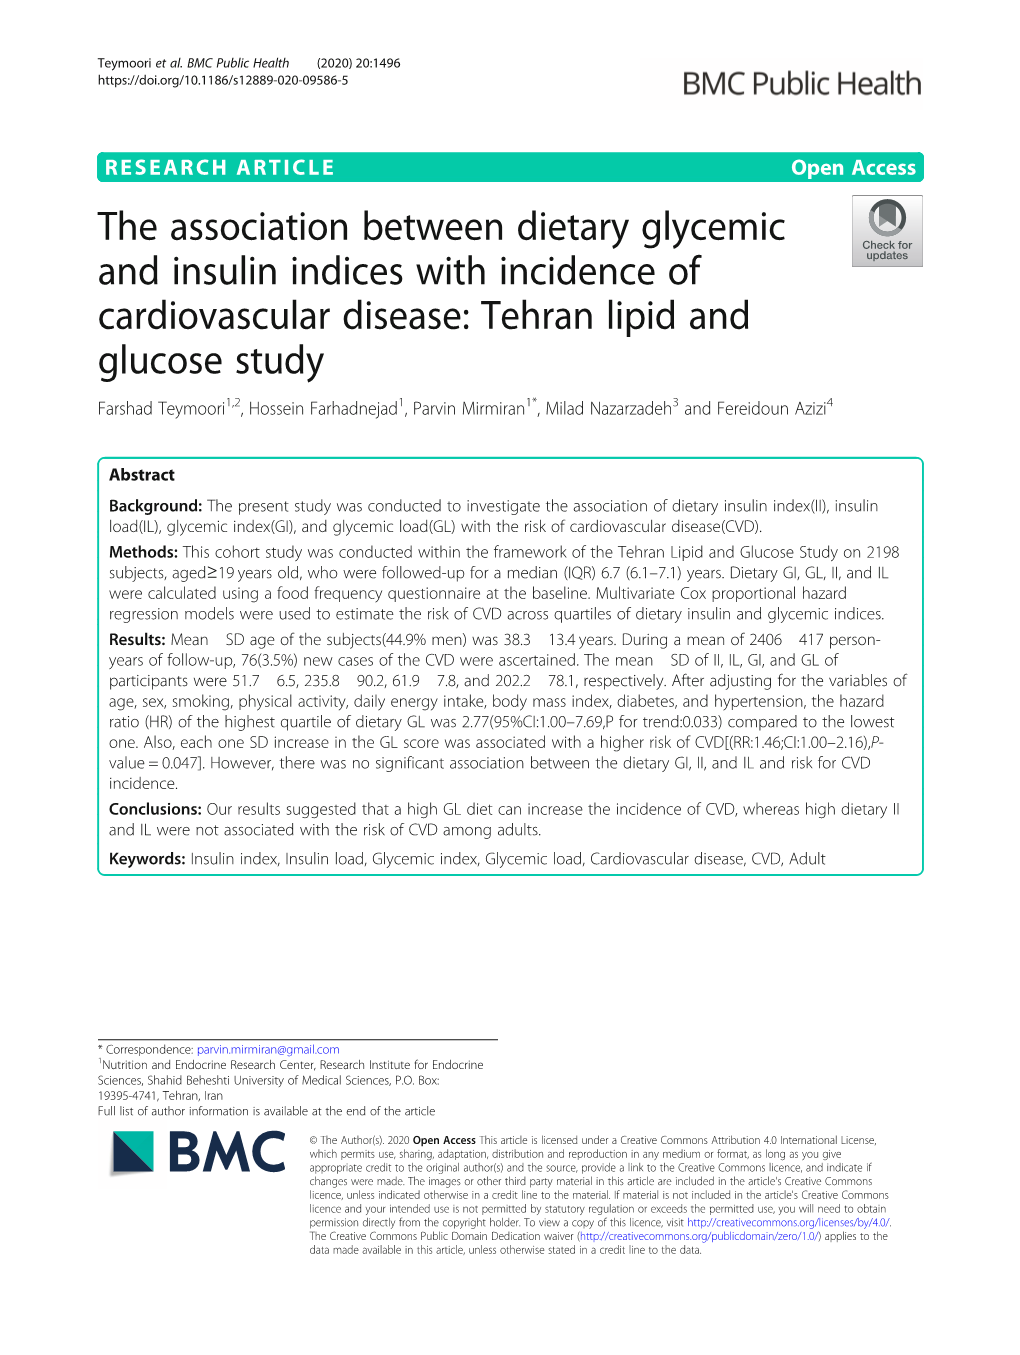 The Association Between Dietary Glycemic and Insulin Indices With